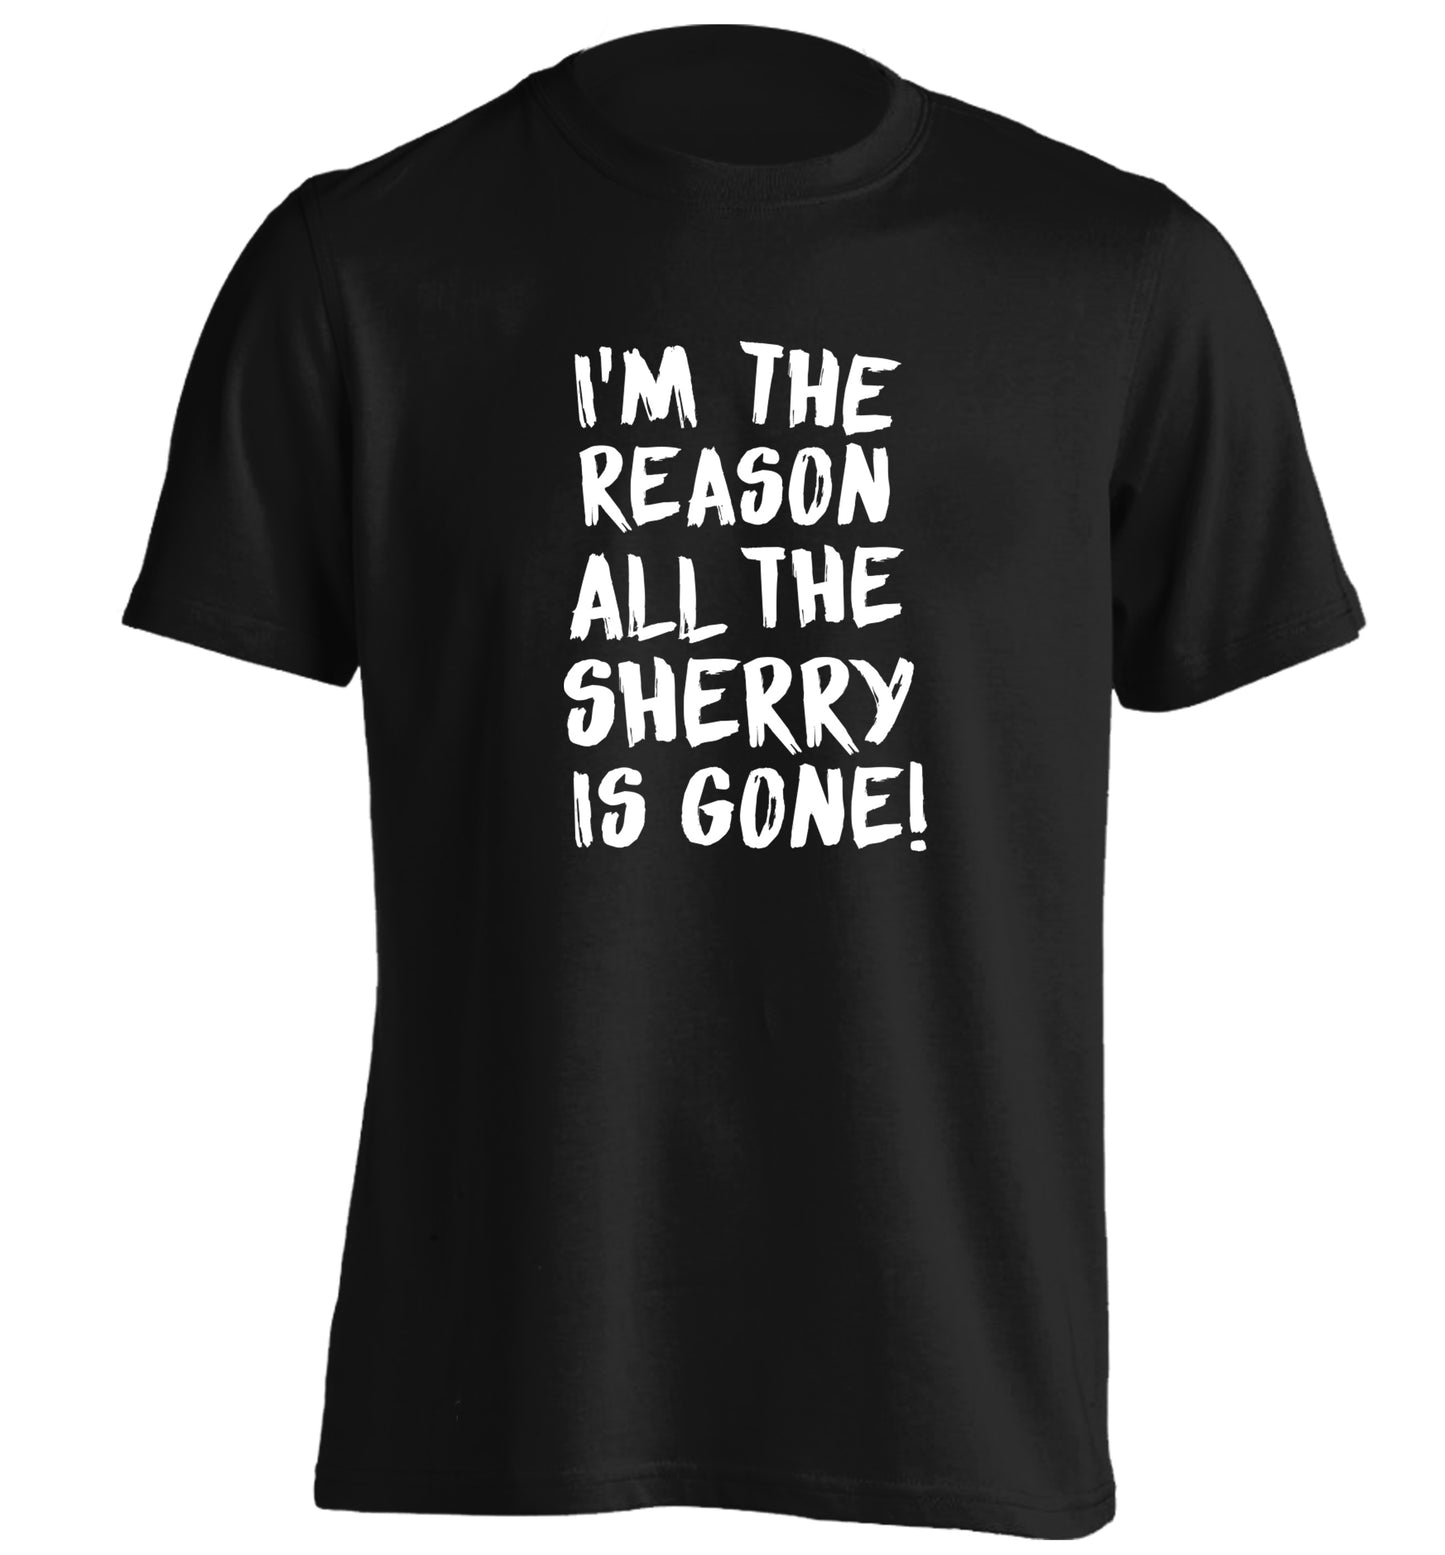 I'm the reason all the sherry is gone adults unisex black Tshirt 2XL